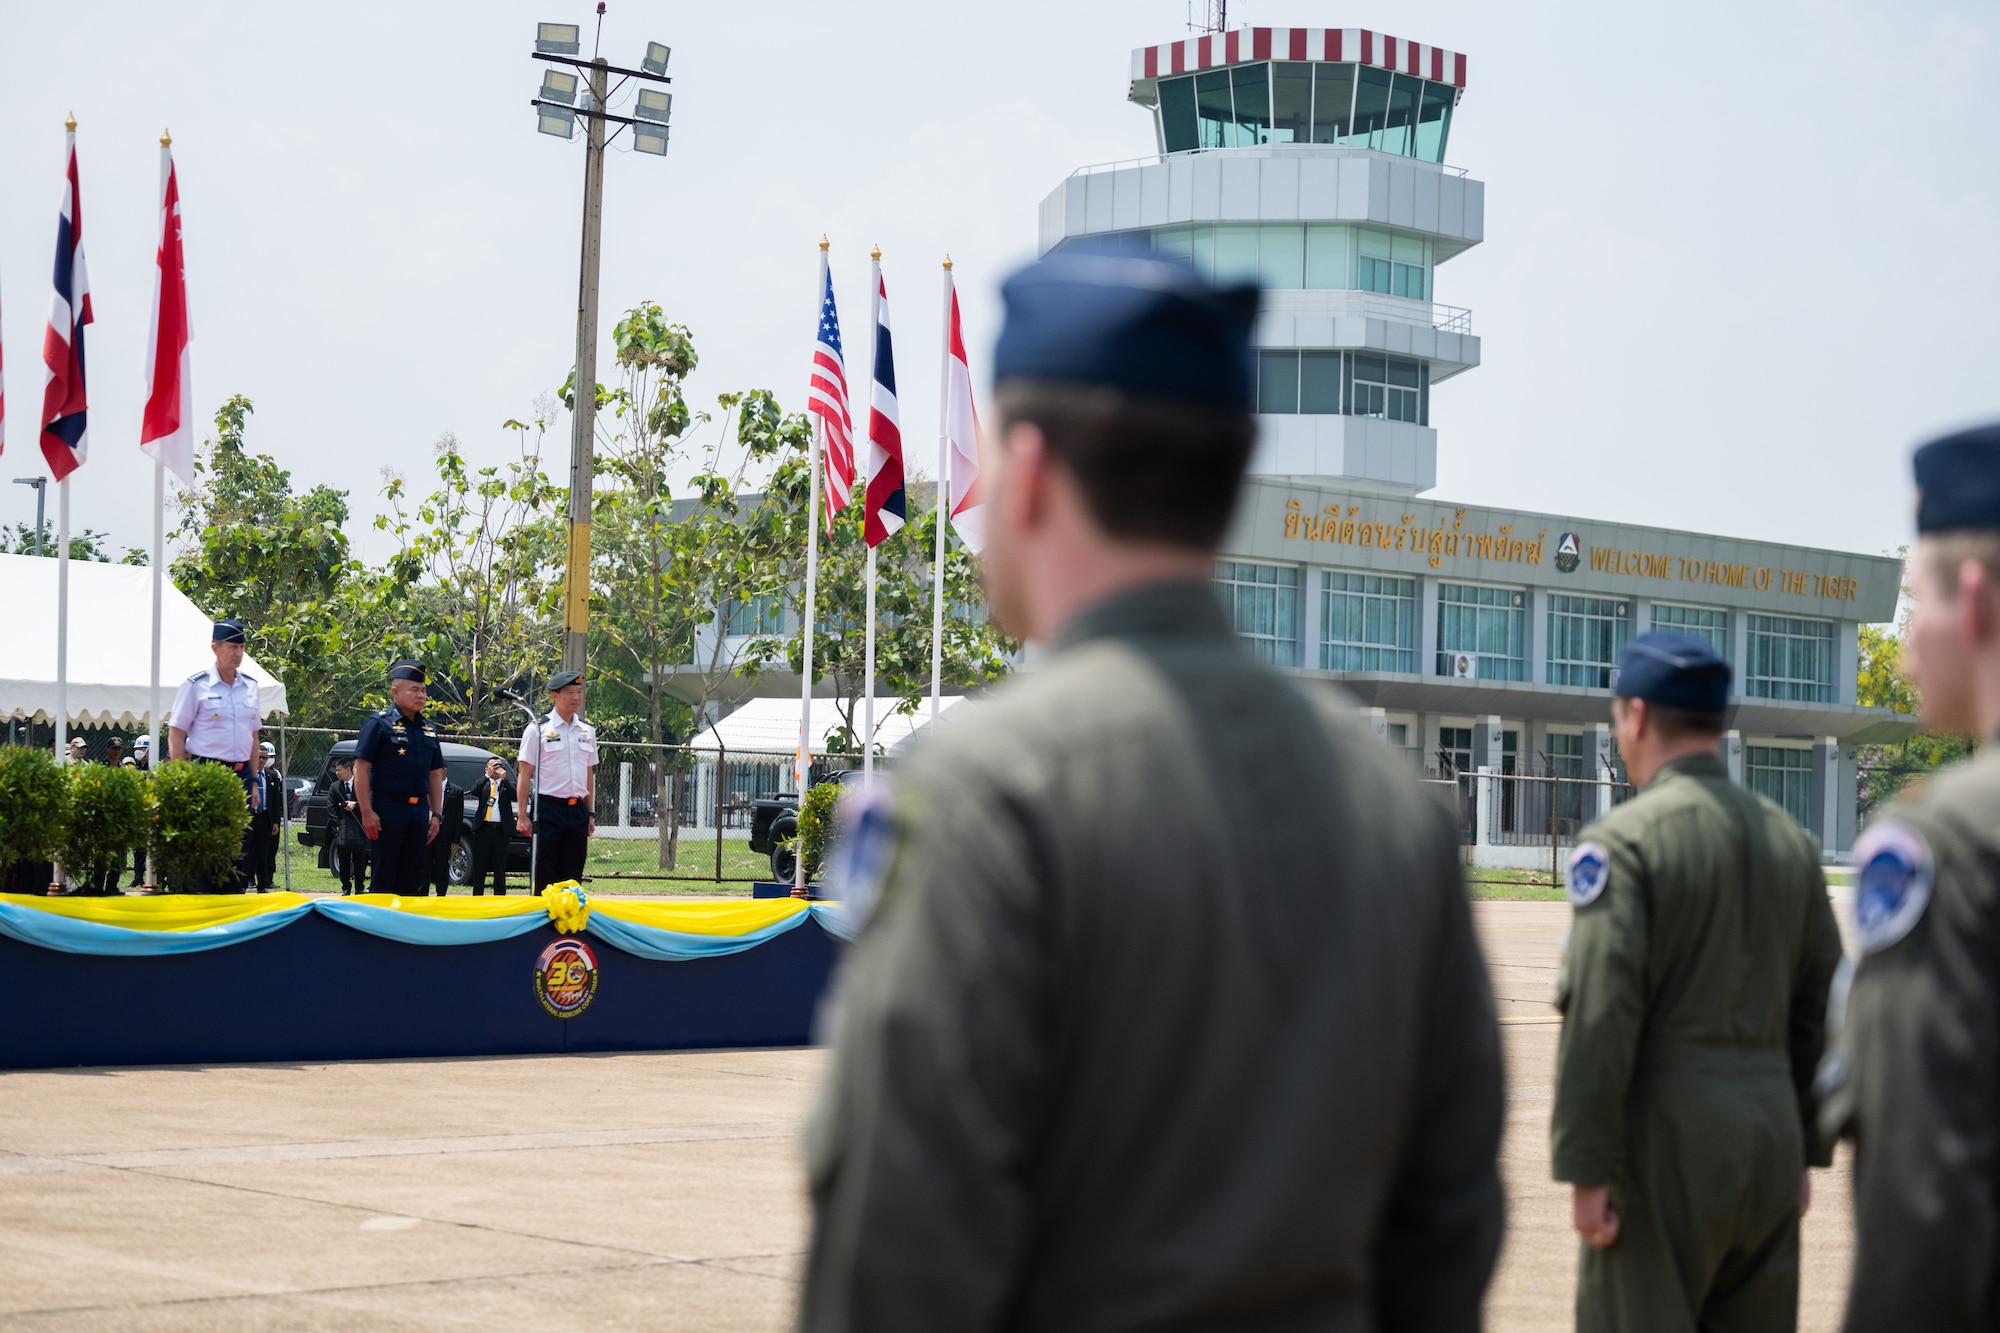 U.S. Air Force Gen. Kevin Schneider, Pacific Air Forces commander, attends the closing ceremony for Cope Tiger 2024 alongside Royal Thai Air Force Air Chief Marshal Punpakdee Pattanakul, Commander-in-Chief, and Republic of Singapore Air Force Brig. Gen. Kelvin Fan, Chief of Air Force, at Korat Royal Thai Air Force Base, Thailand, March 29, 2024. This year marked the first time 5th generation aircraft participated in the exercise—F-35A Lightning IIs from Eielson Air Force Base, Alaska joined F-16C Fighting Flacons from Kunsan Air Base, Republic of Korea. (U.S. Air Force photo by Tech. Sgt. Hailey Haux)